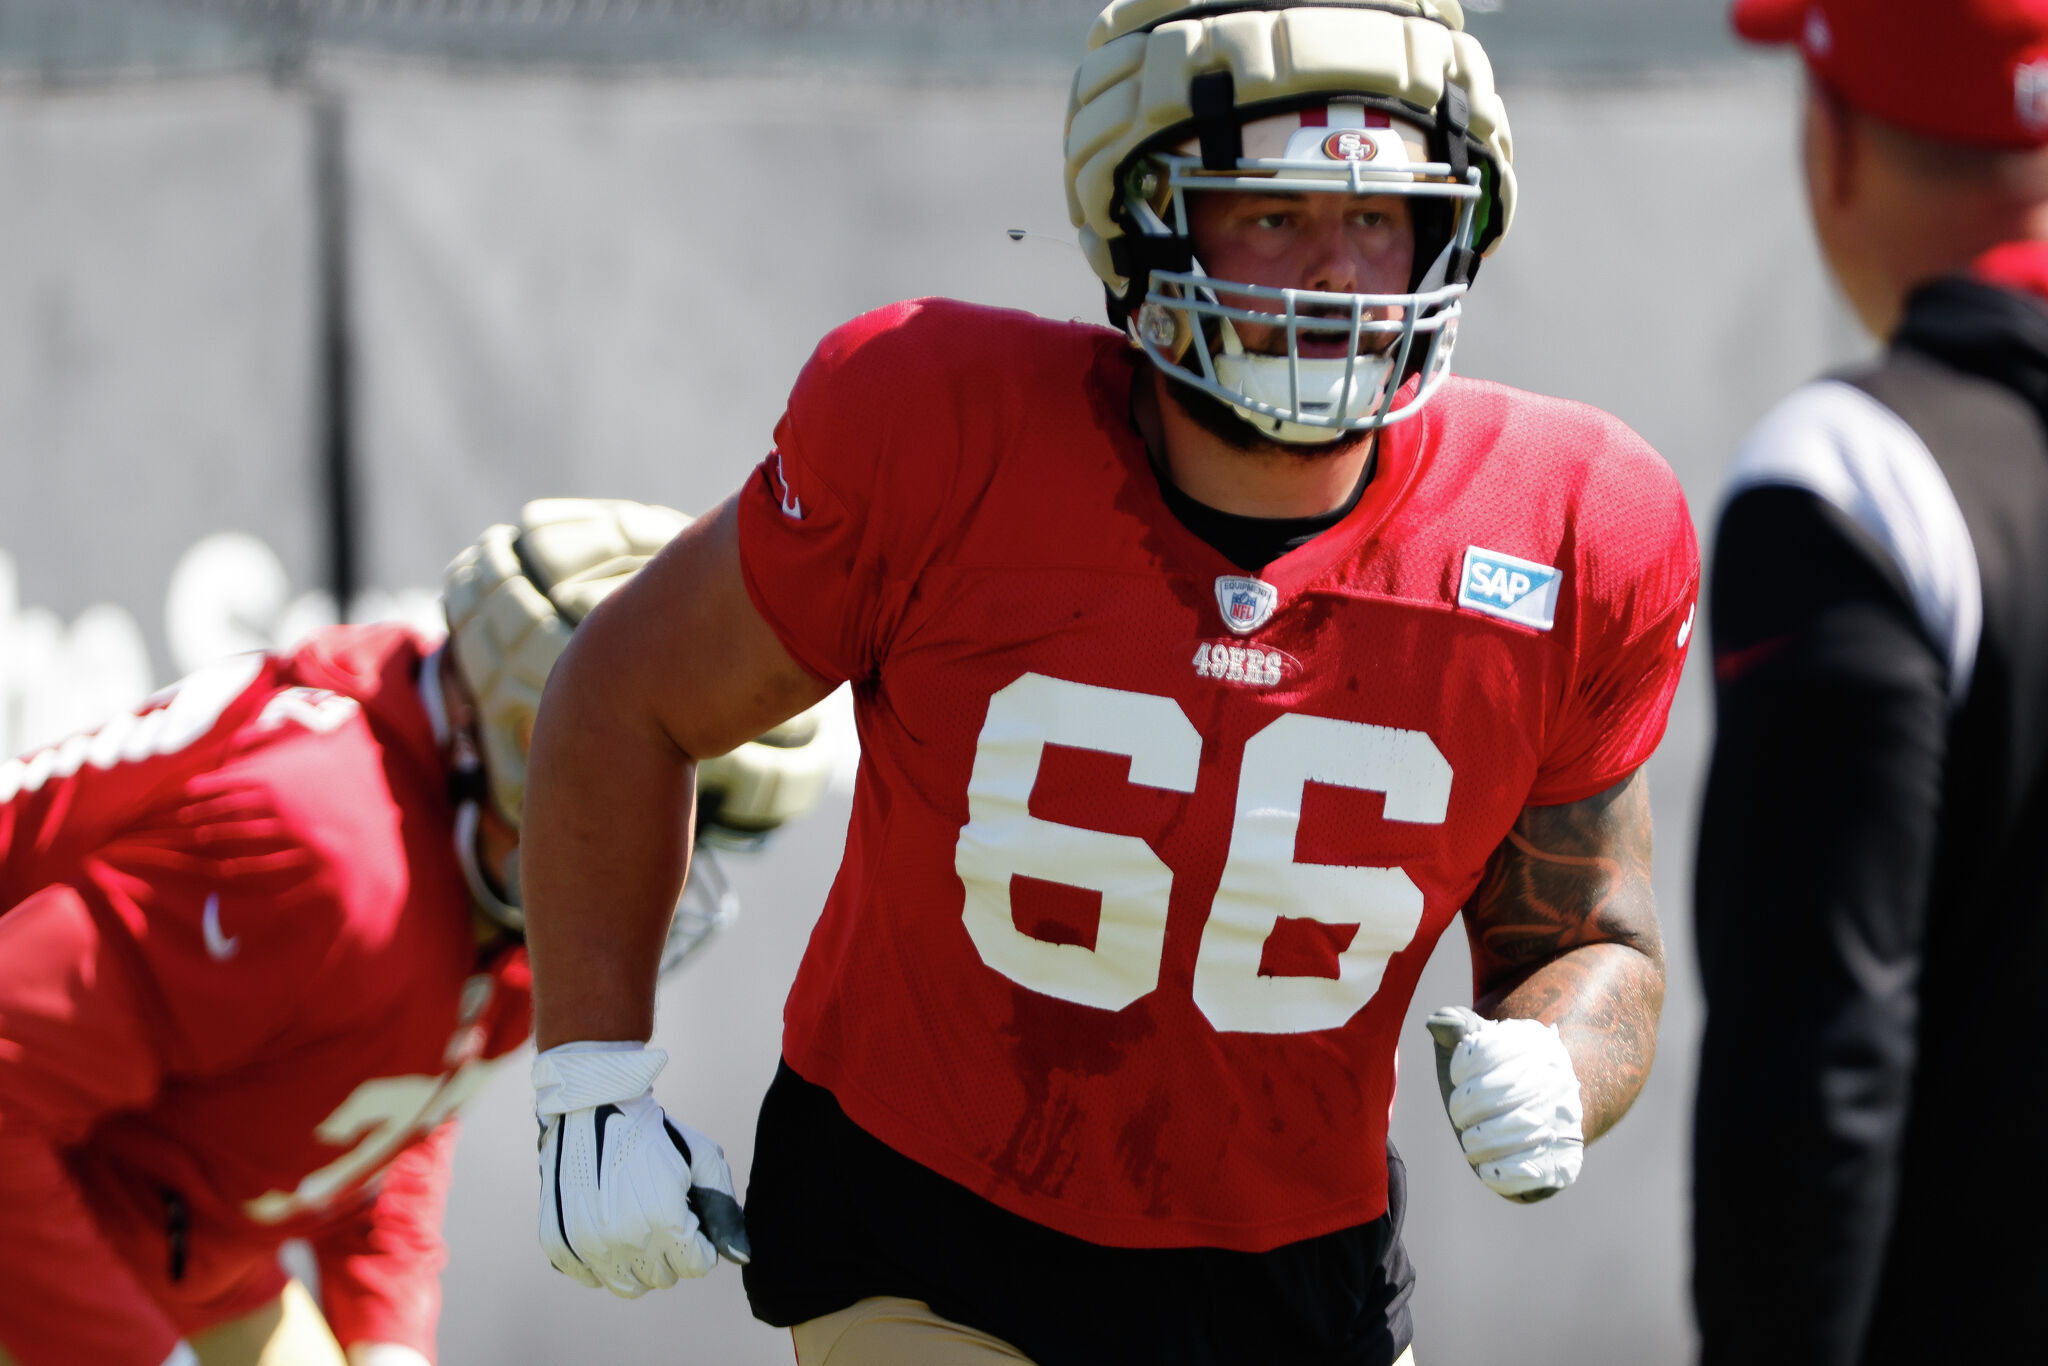 From locksmith to lineman, Joey Fisher's crooked path to 49ers' roster